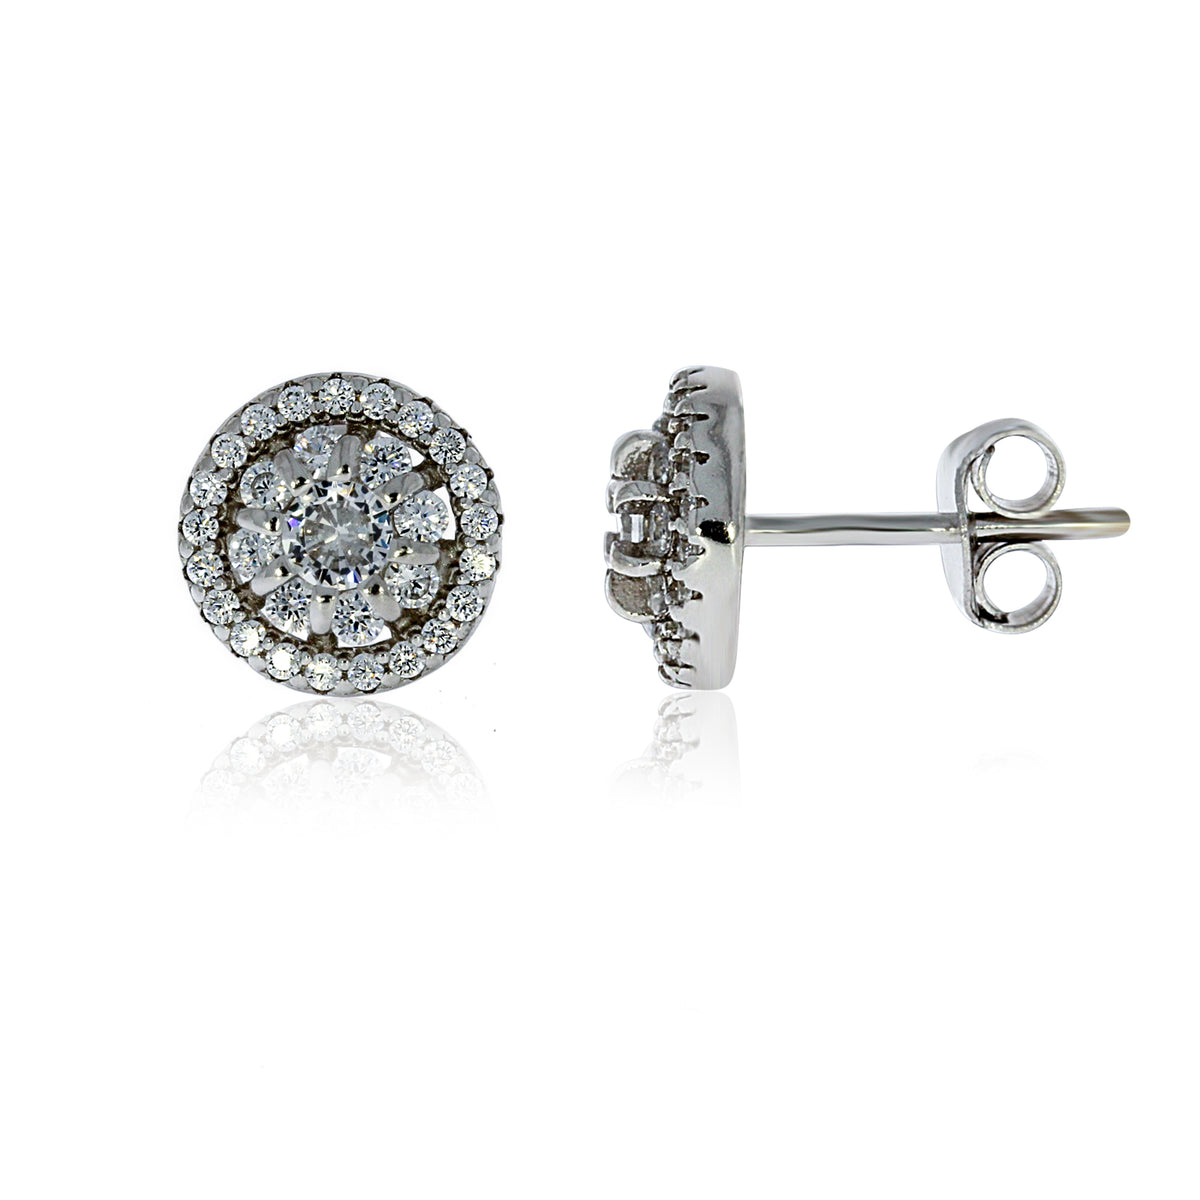 Silver Halo Stud Earrings With Pave Centre - 8.8mm